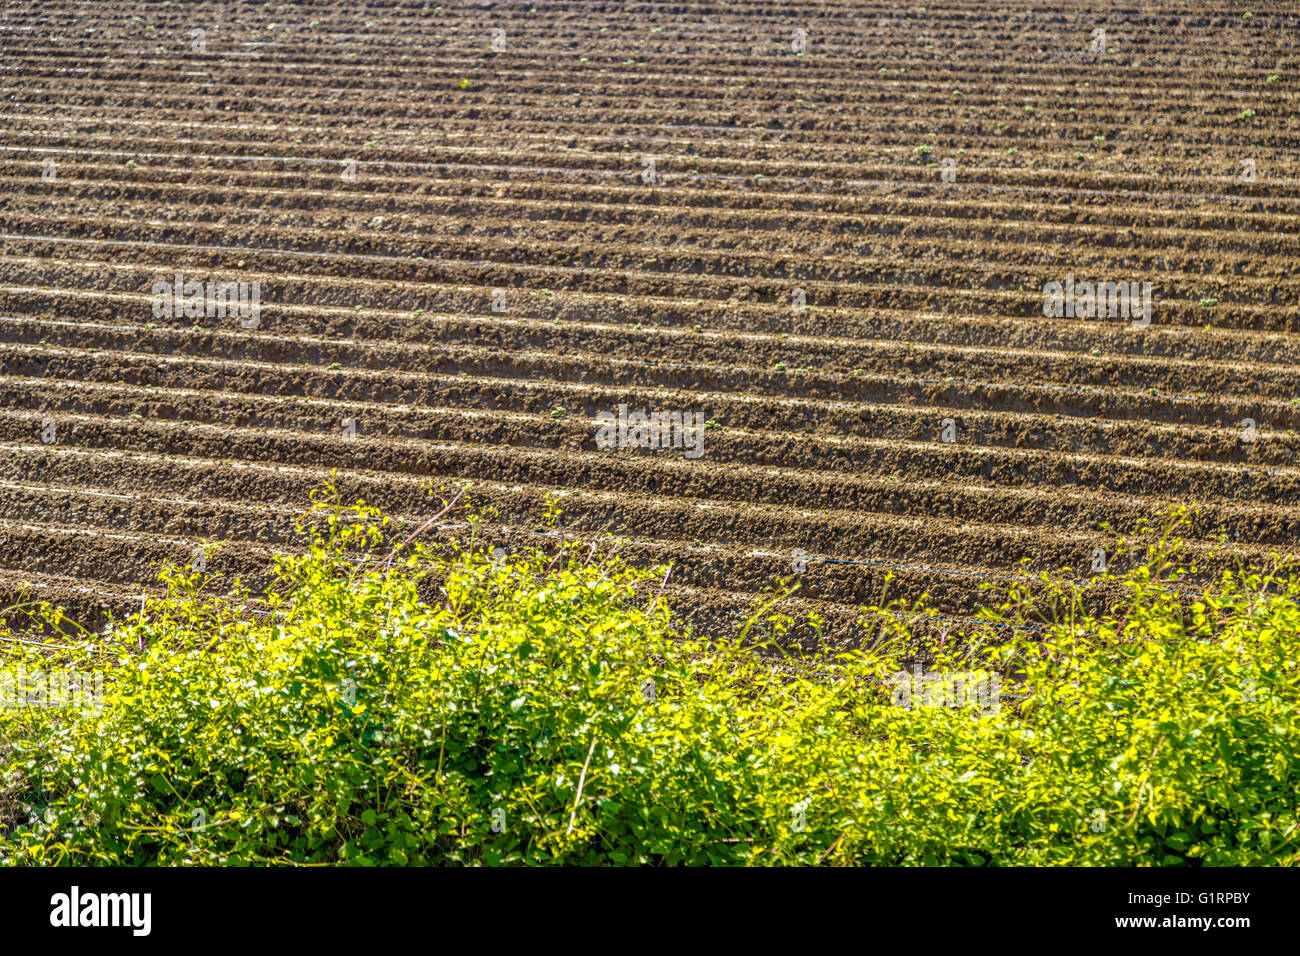 the furrows of a plowed field Stock Photo